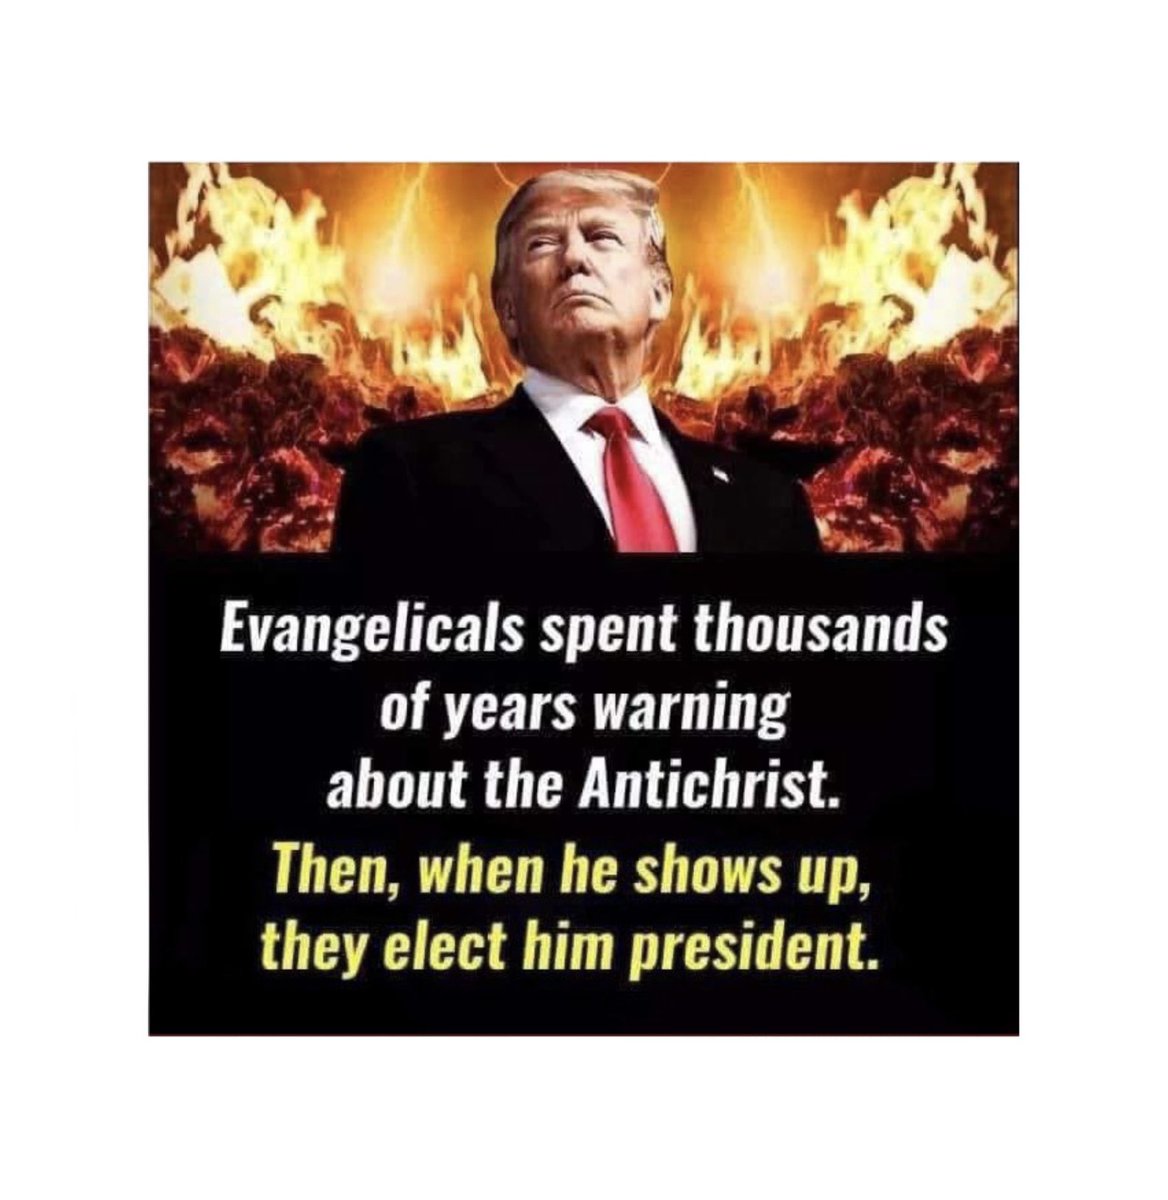 “Evangelicals” can not be allowed to shove another antichrist presidency down America’s throat. #VoteBlueToSaveAmericaFromTrump